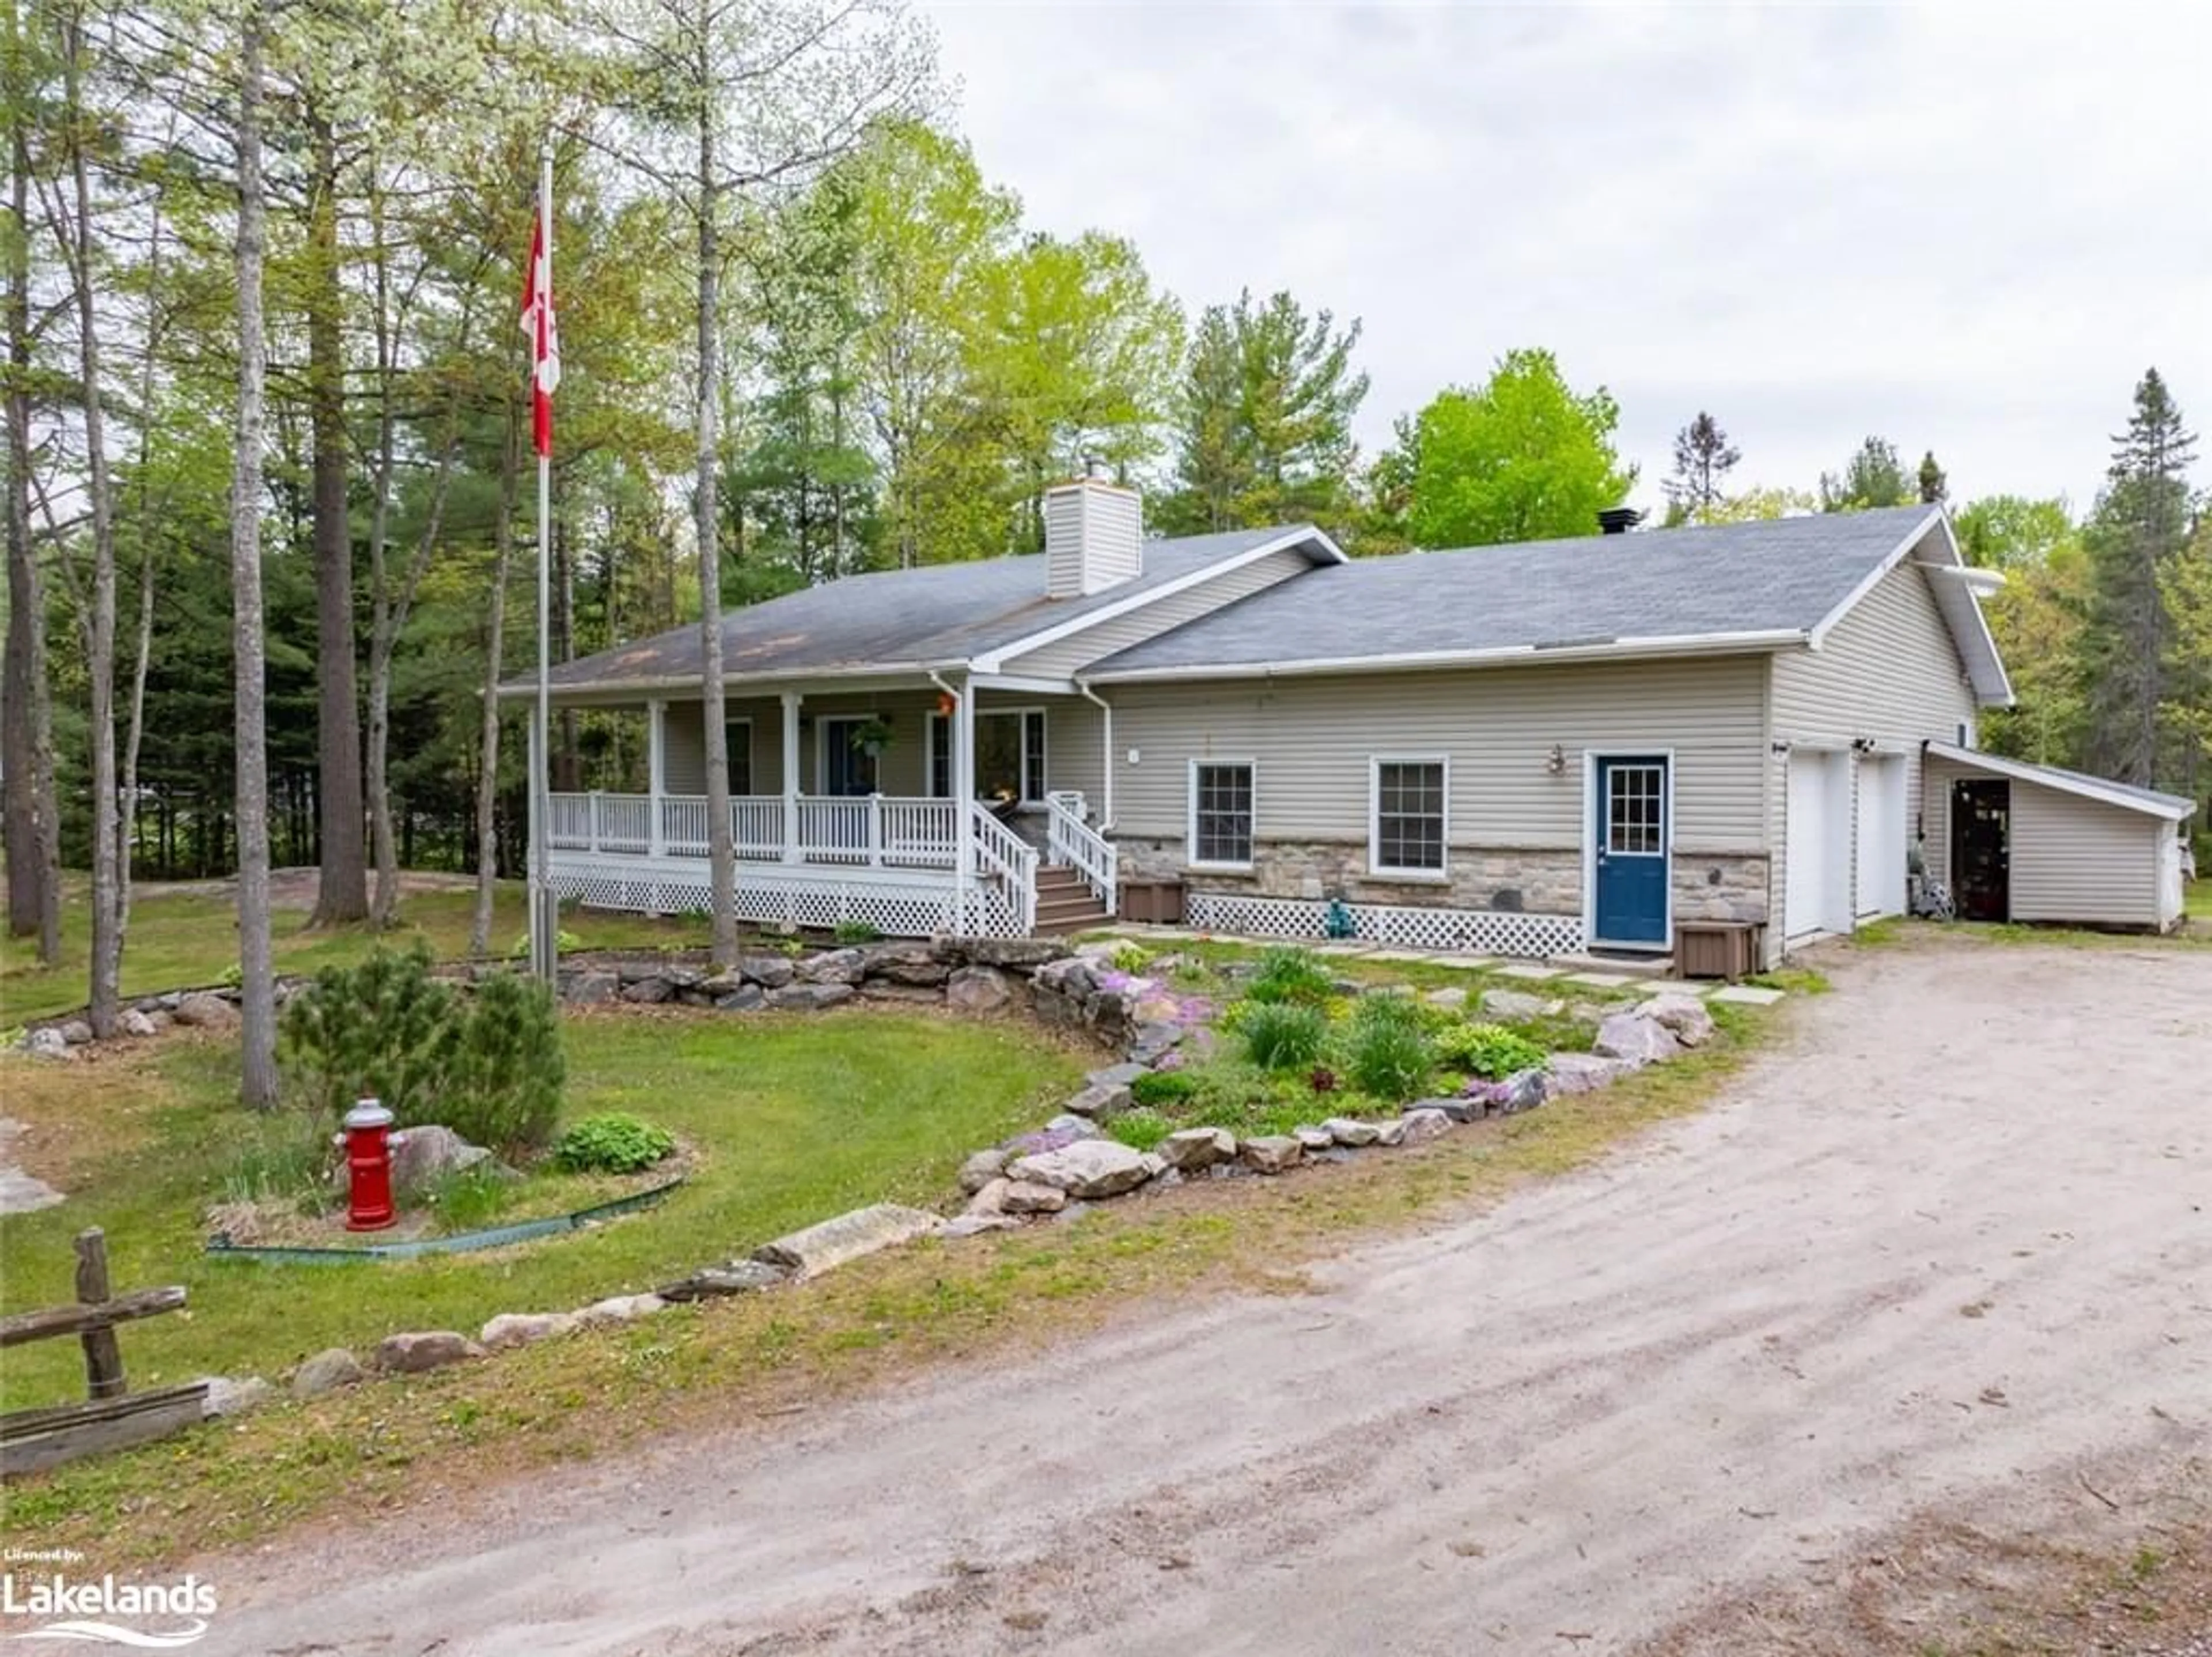 Cottage for 91 Hammel Ave, McDougall Ontario P2A 2W9